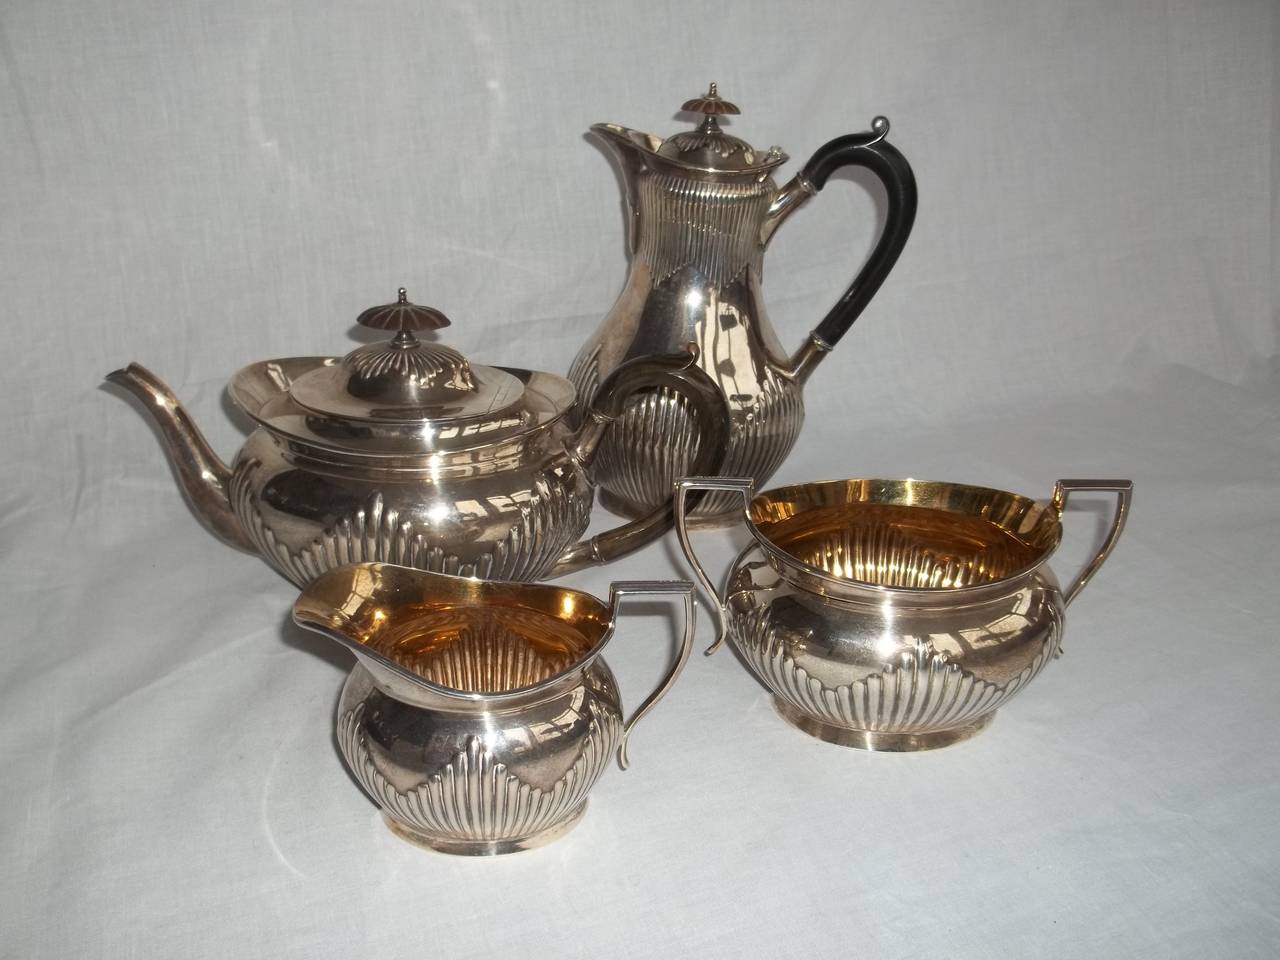 This is a heavy four piece, Solid sterling Silver, Tea and Coffee Service, made by Elkington & Co. Ltd in 1895.

There is a Tea-Pot, Coffee Pot, sugar basket and cream jug - all matching.
The sugar basket  and cream jug are gilded on the inside